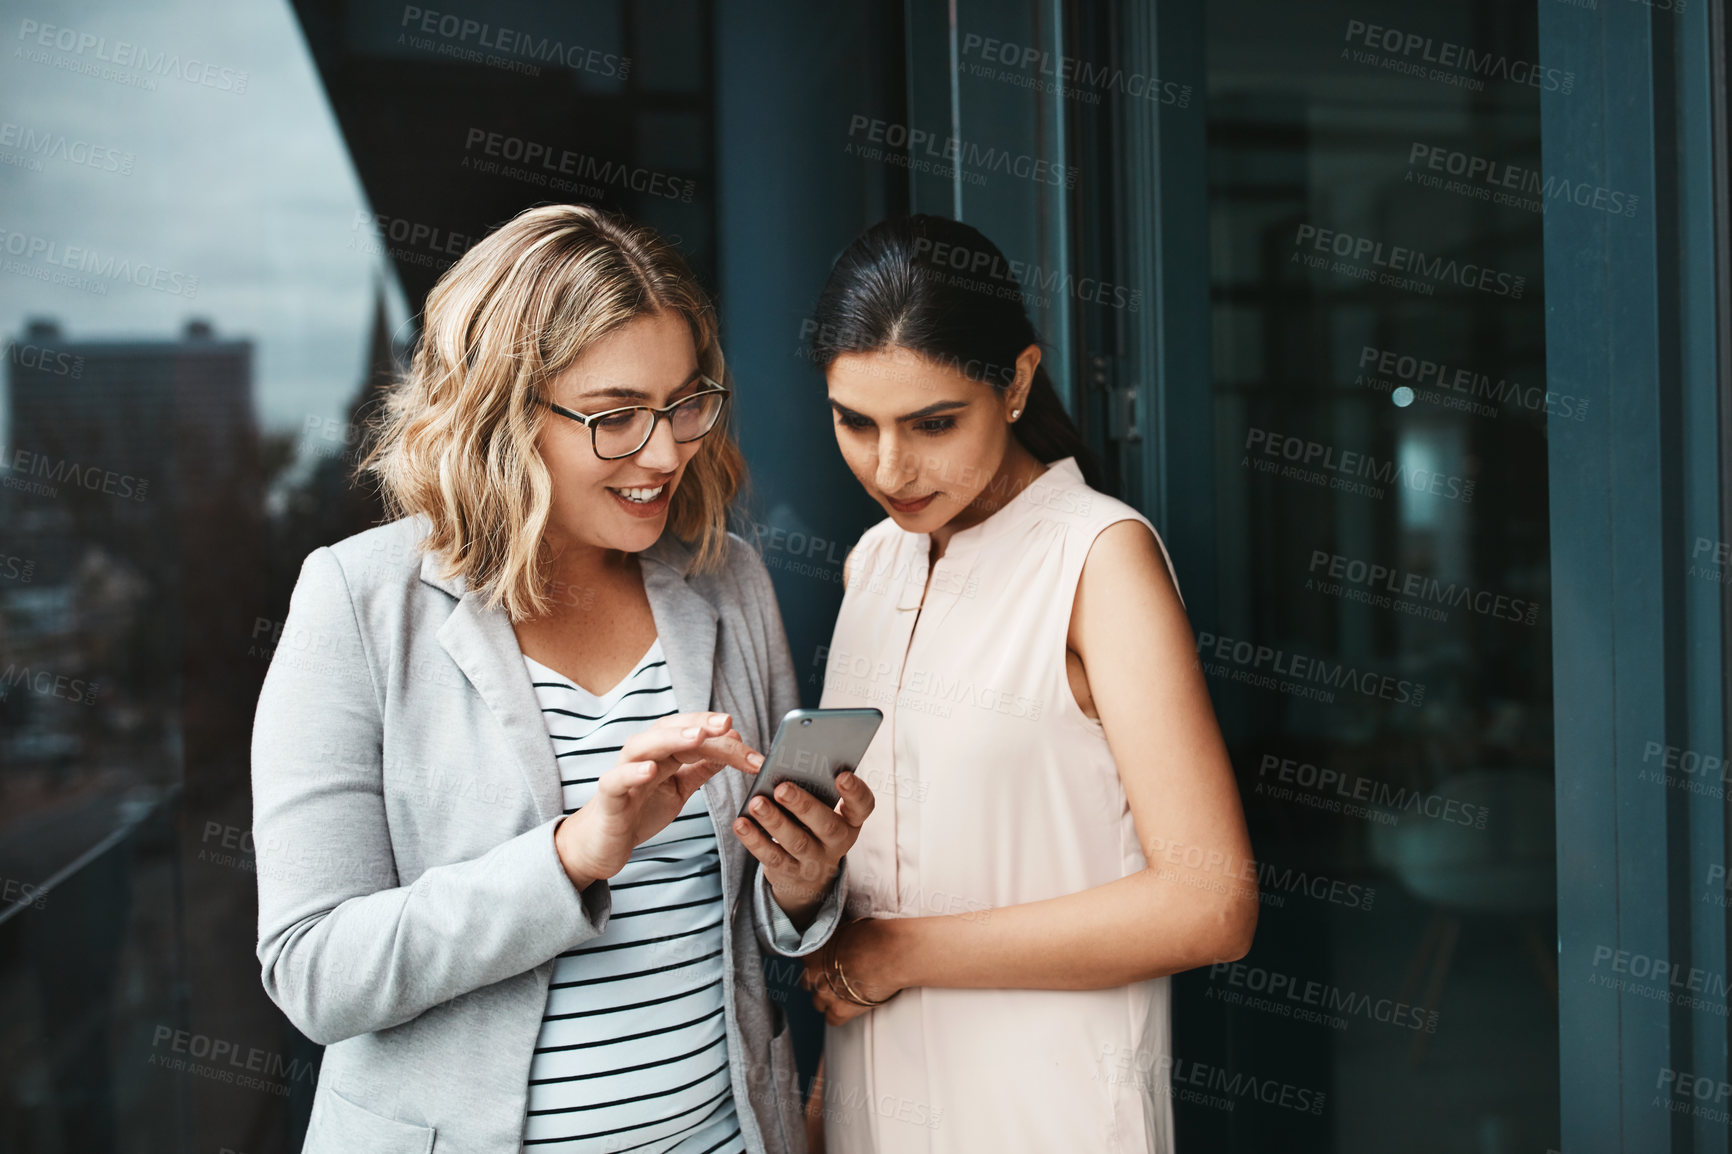 Buy stock photo Shot of two businesswomen using a cellphone together on the office balcony